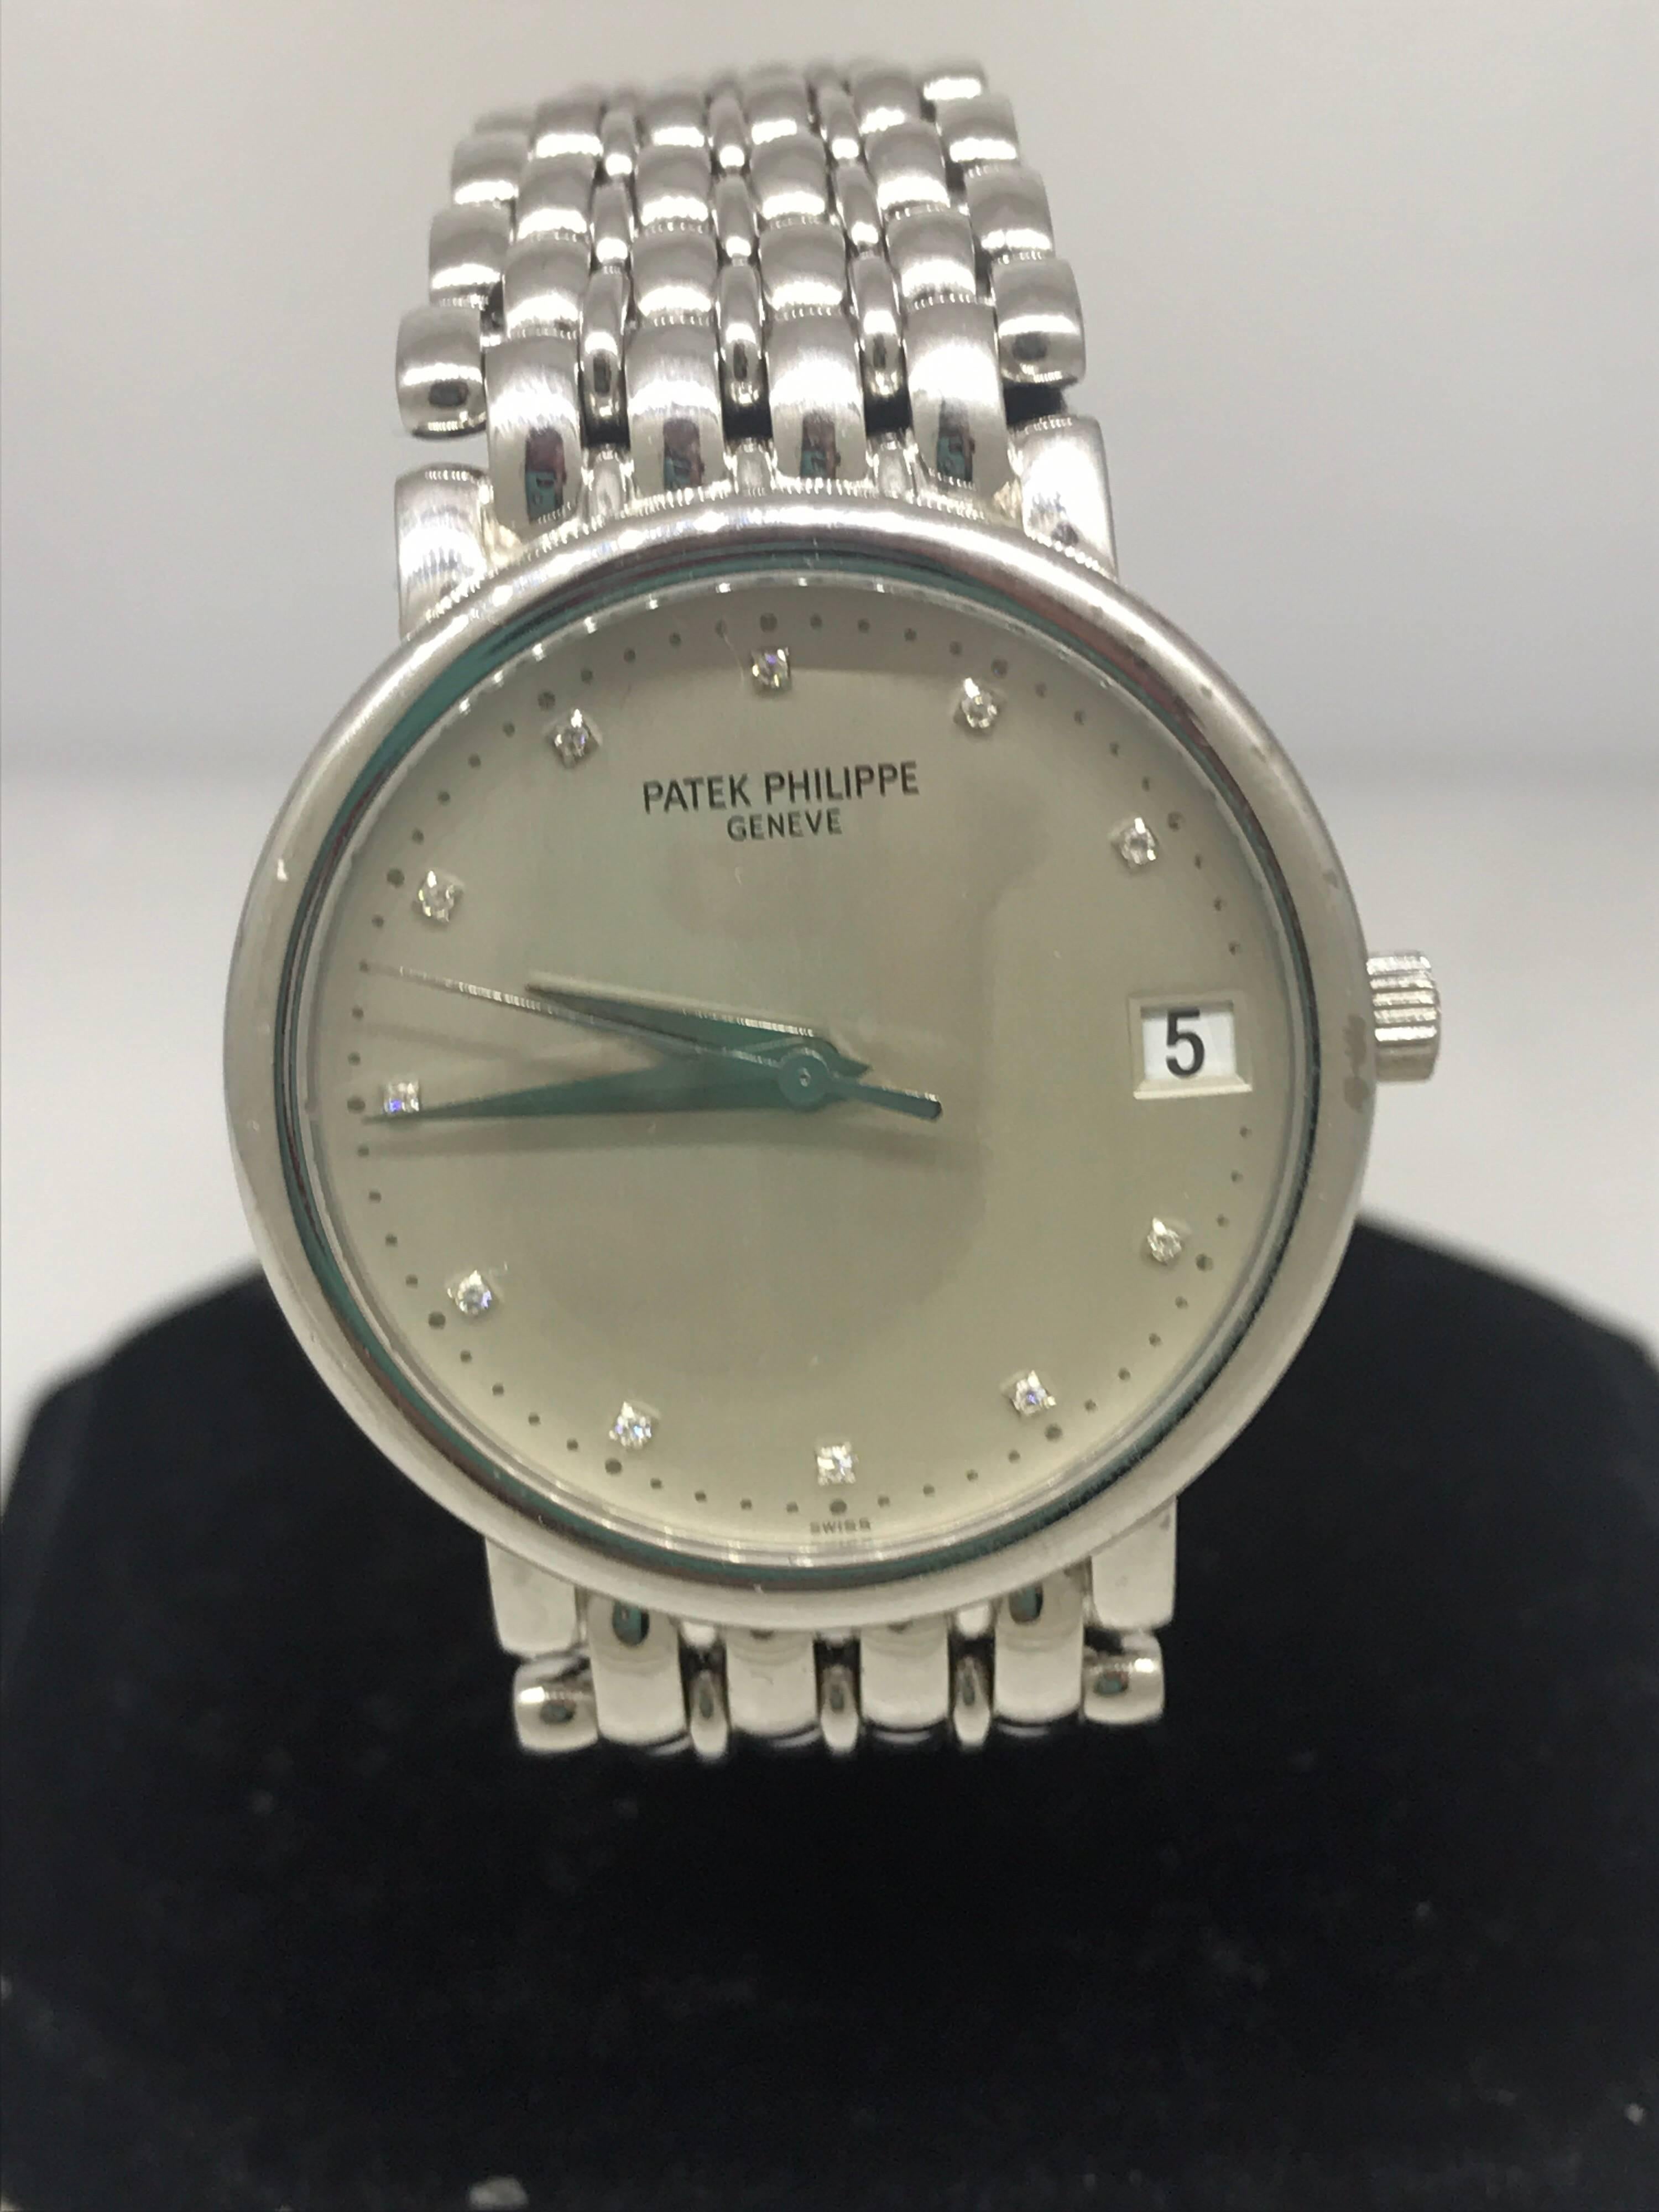 Patek Philippe Calatrava Men's Watch

Model Number: 3998/1G

100% Authentic

Pre-Owned in Excellent

Comes with a generic watch box

18 Karat White Gold Case & Bracelet

Scratch Resistant Sapphire Crystal

Silver Dial

Diamond Hour Markers

Case